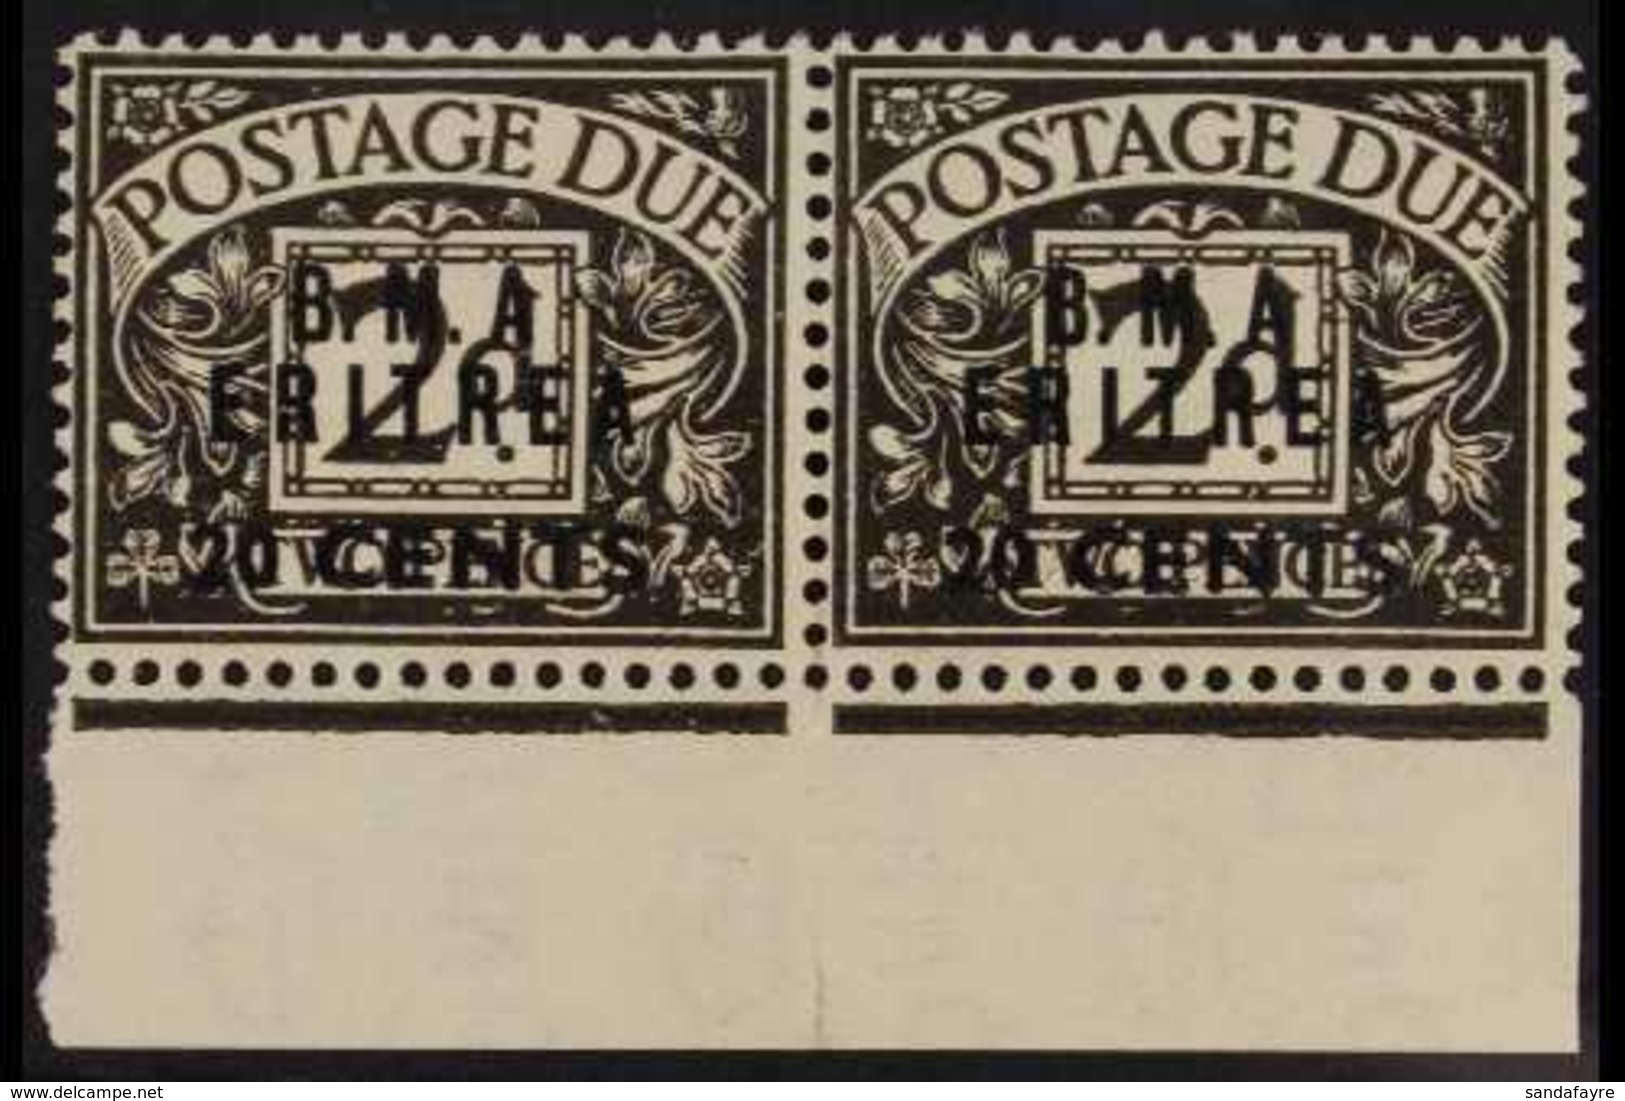 ERITREA  POSTAGE DUES 1948 20c On 2d Agate, Horizontal Pair Both Showing Variety "No Stop After A", SG ED 3a, Very Fine  - Italiaans Oost-Afrika